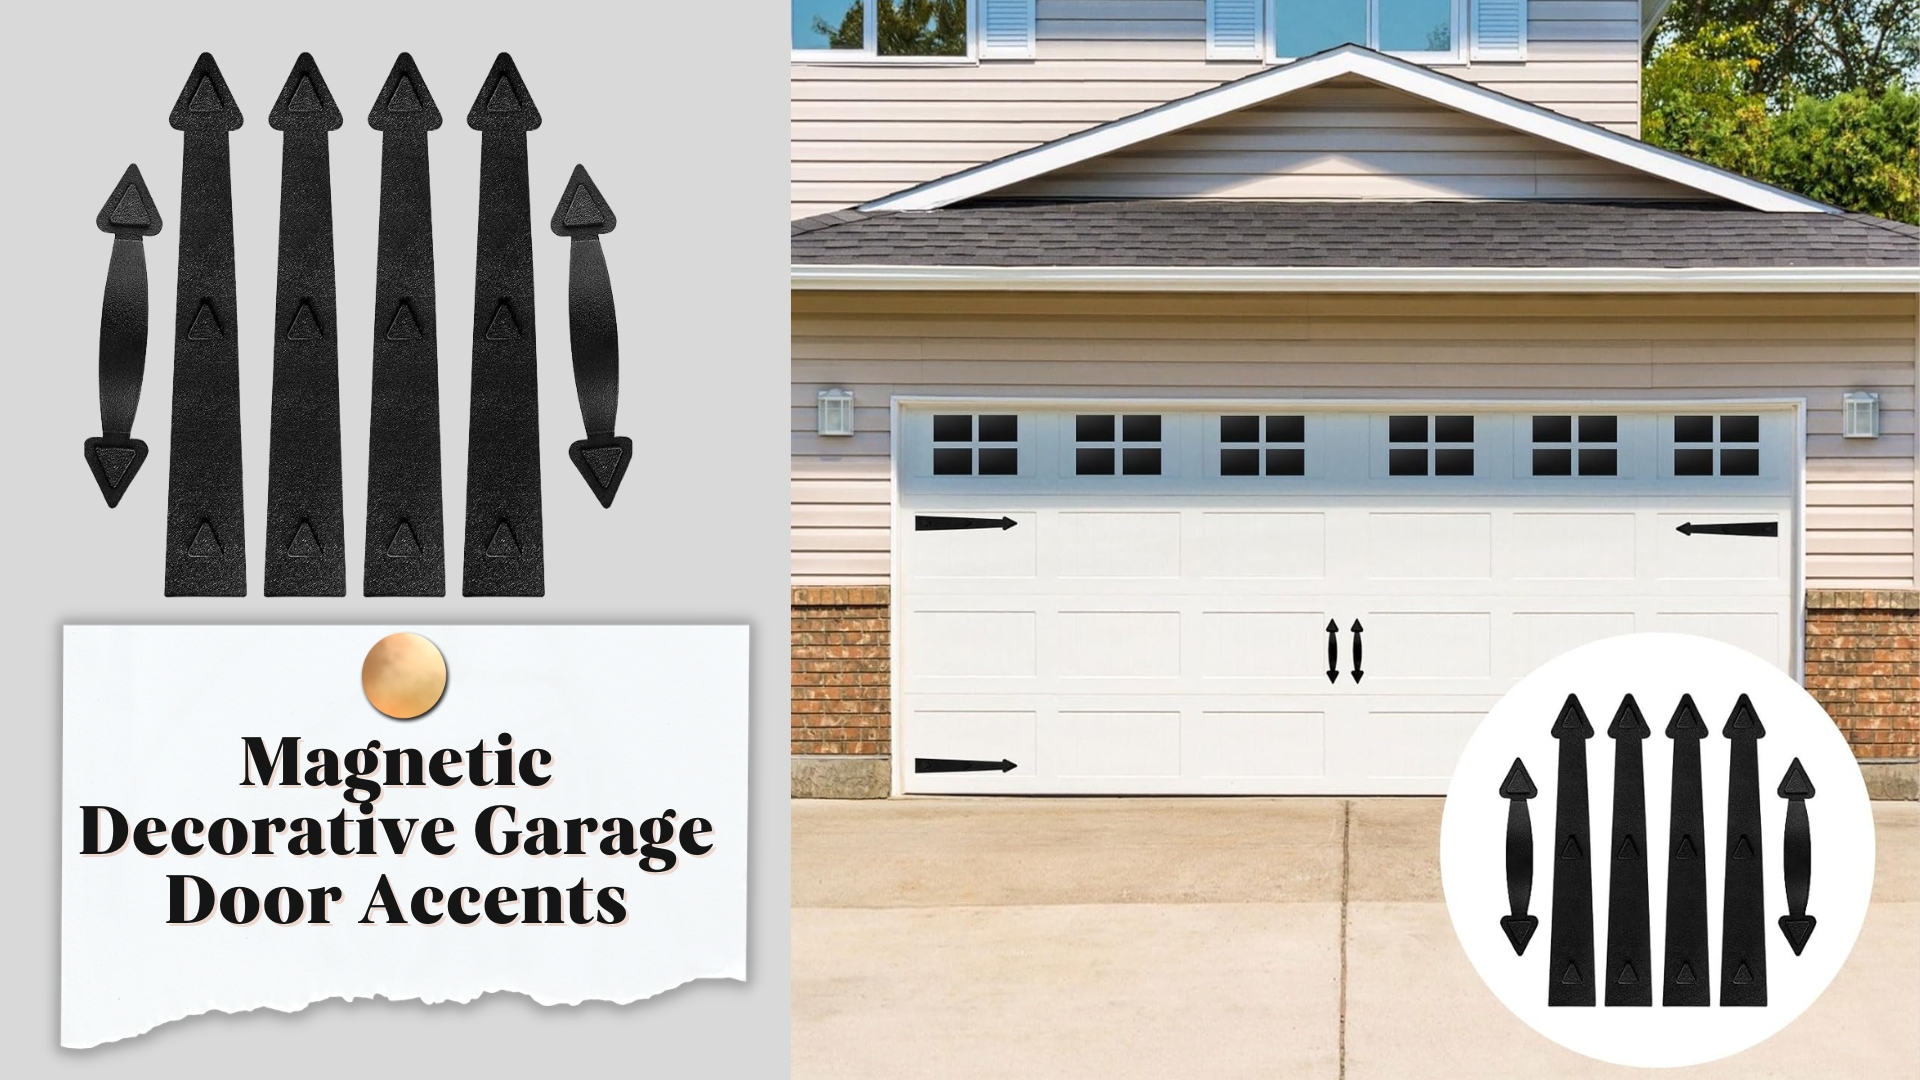 Magnetic decorative hardware installed in a residential garage door